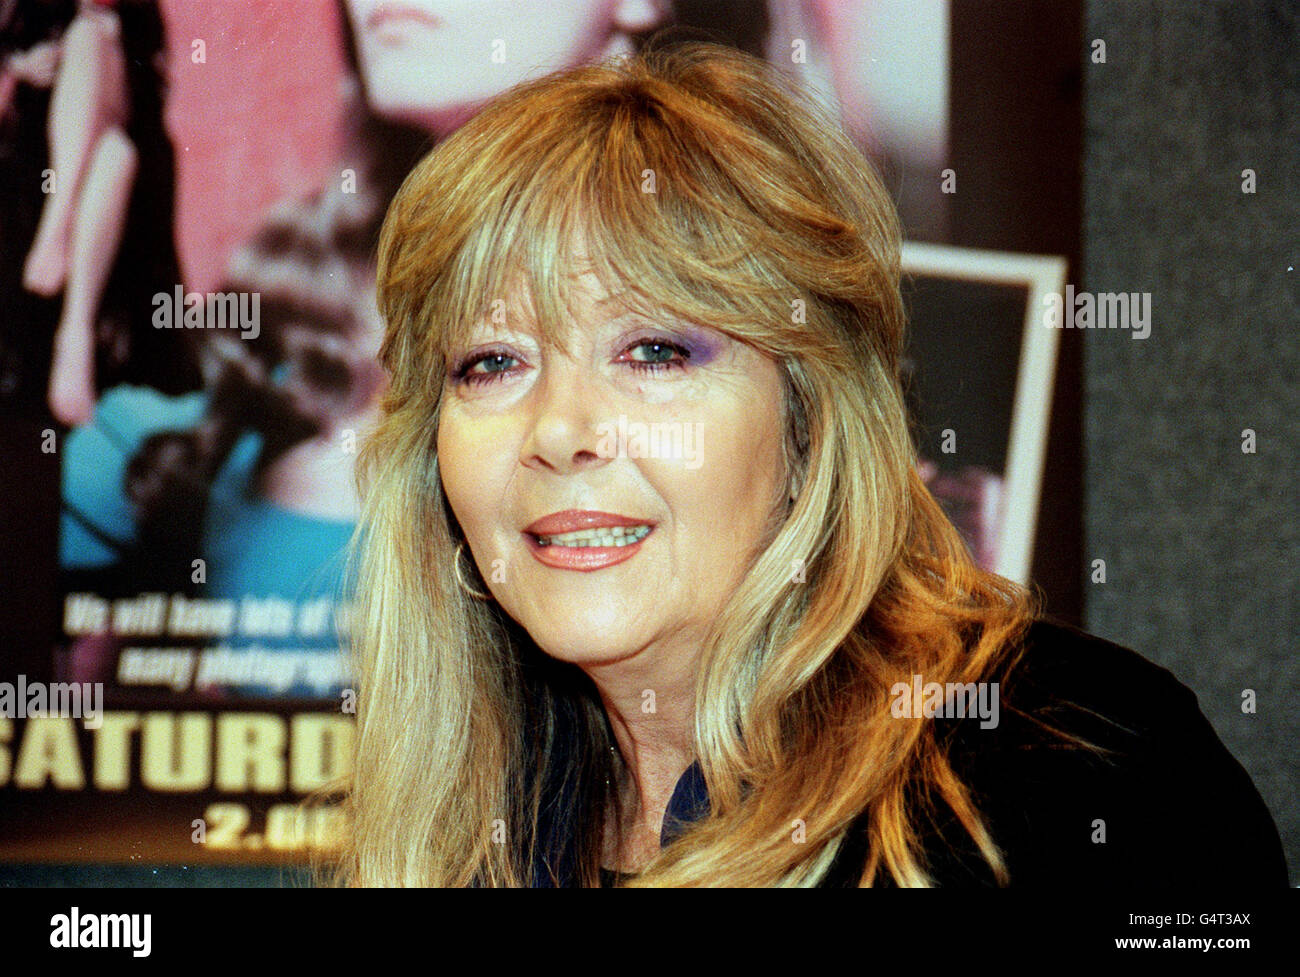 Hammer Horror actress Ingrid Pitt at the opening of Collect '99 at Wembley Exhibition Centre in London. Collect '99 is an exhibition with items ranging from models to stamps, to autographs and TV and Film memorabilia. Stock Photo